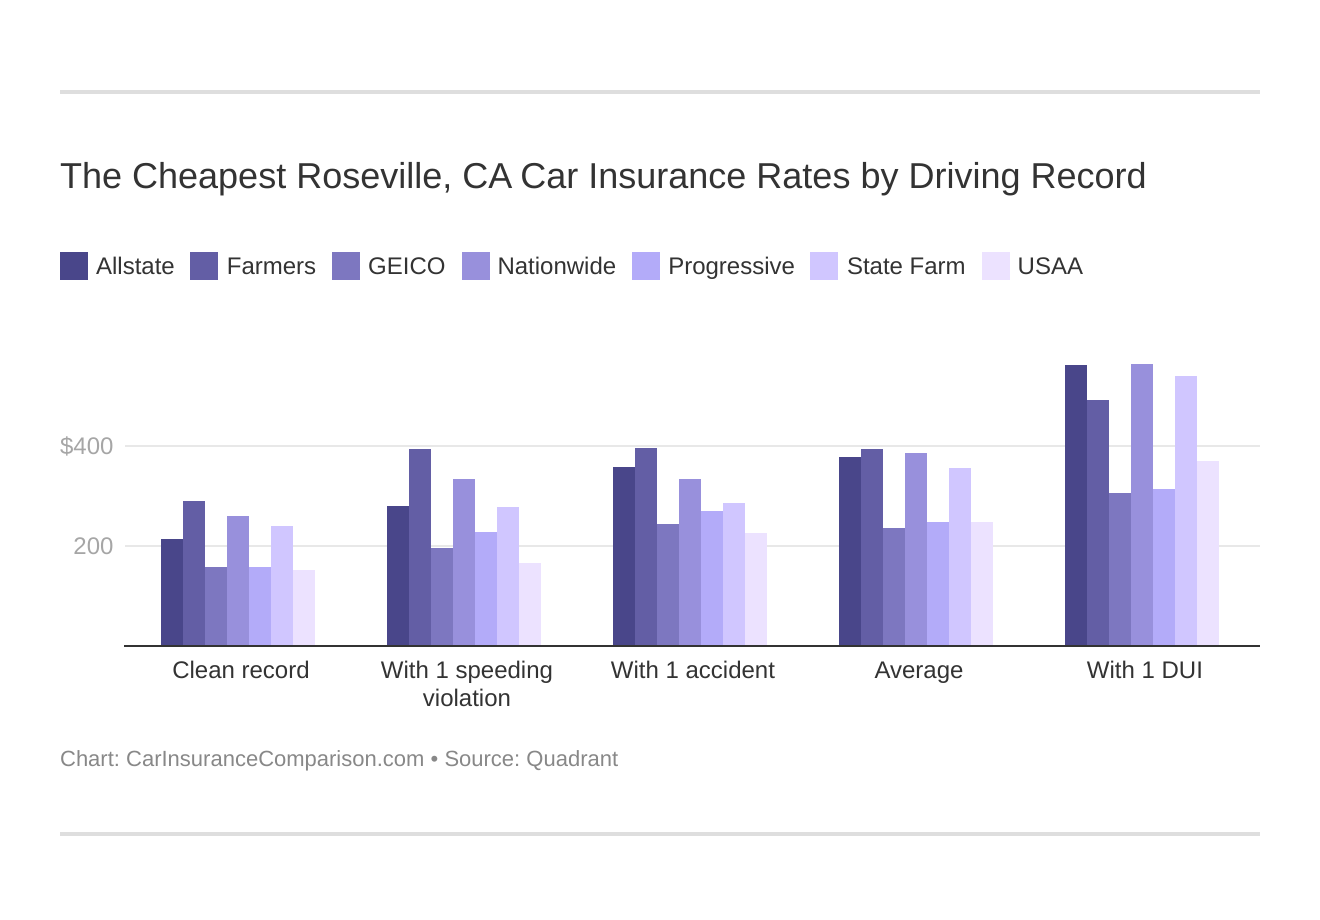 The Cheapest Roseville, CA Car Insurance Rates by Driving Record